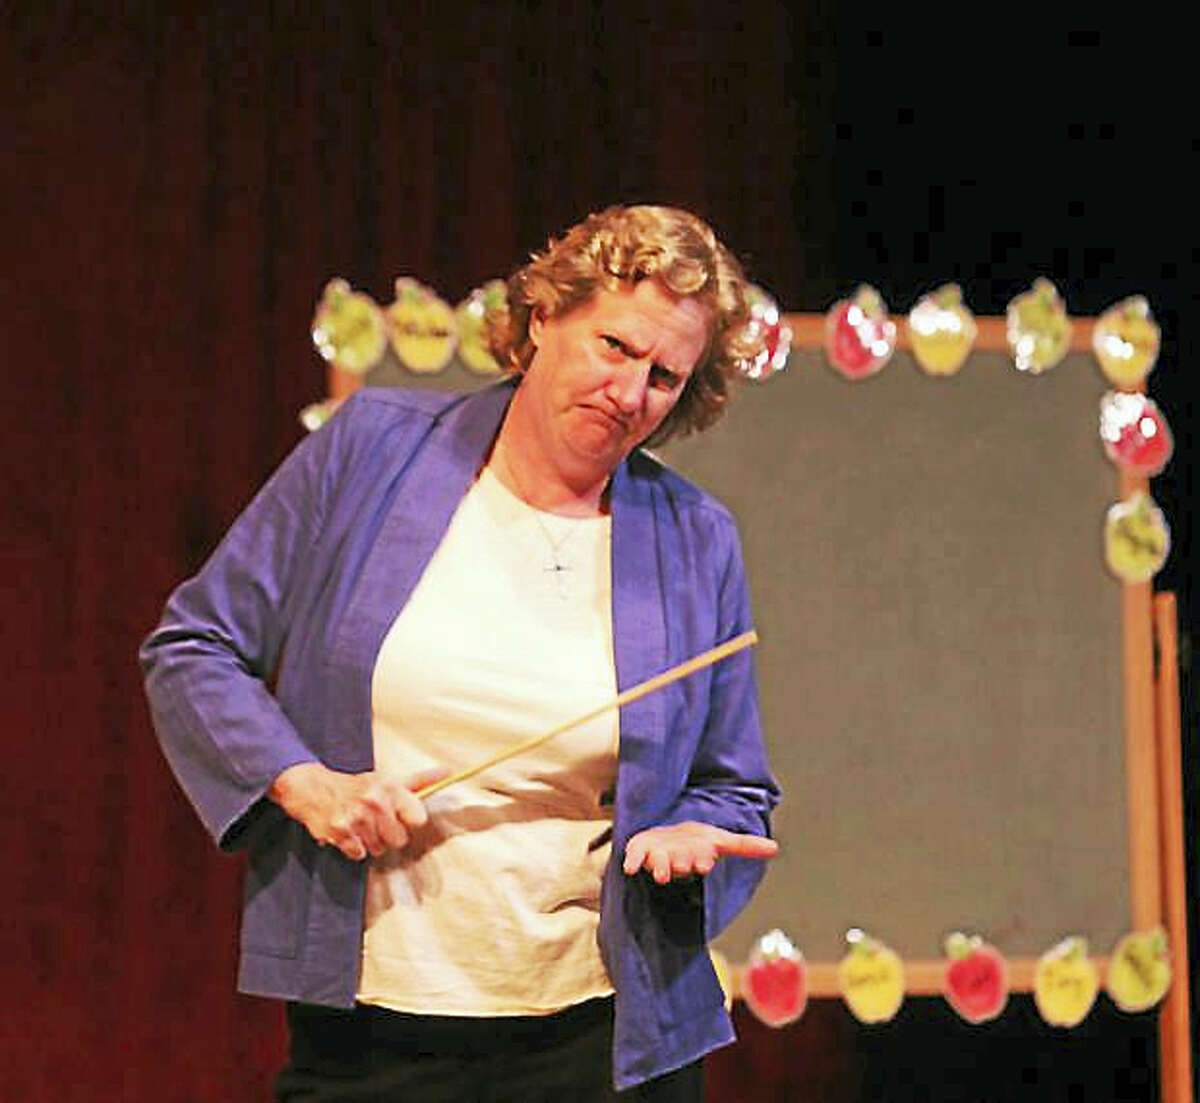 Contributed photo From the creator and co-author of Late Nite Catechism, comes the interactive comedy, Mrs. O’Brien’s Guide to the Golden Rule!, which will be presented Saturday, April 2 at 8 p.m. at the Thomaston Opera House, Main Street, Thomaston.